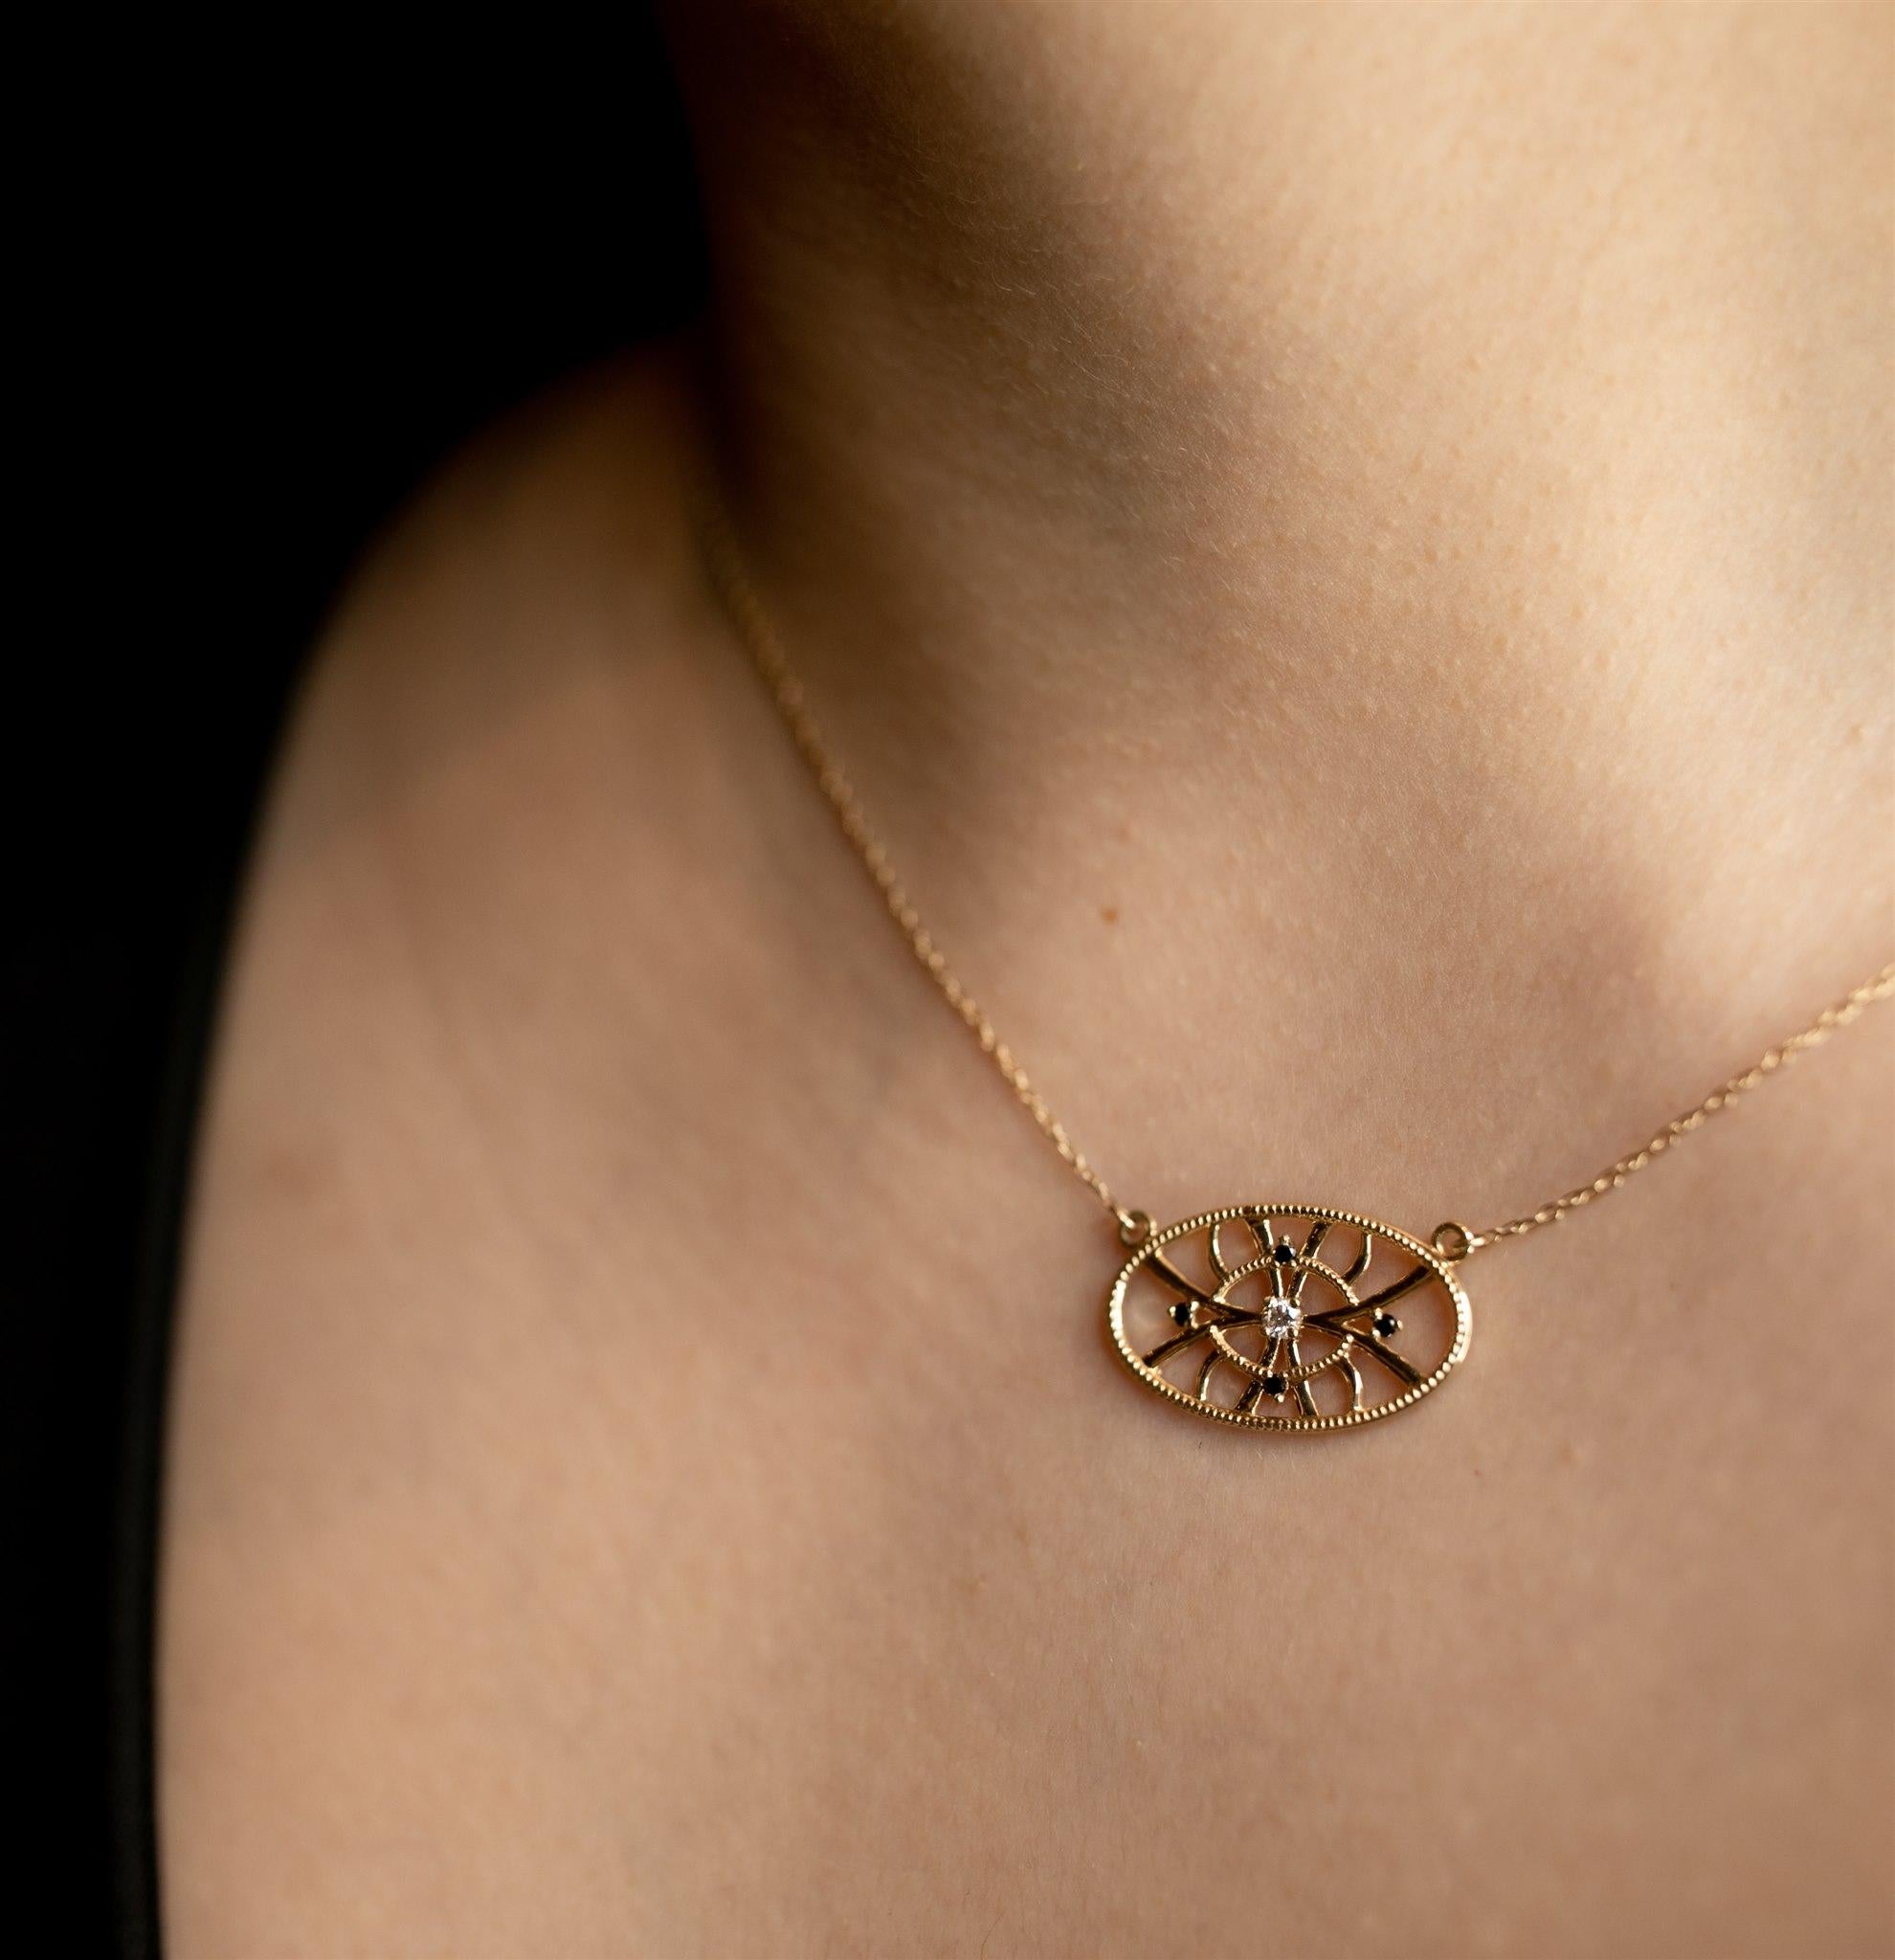 ALCHEMY
BEHOLD THE EXTRAORDINARY 
Four black diamonds sit amongst mystical swirls of hand engraved 14k gold, centering around a single glistening white diamond center on this delicate pendant. 

Materials: 14K Yellow Gold pendant on a 16